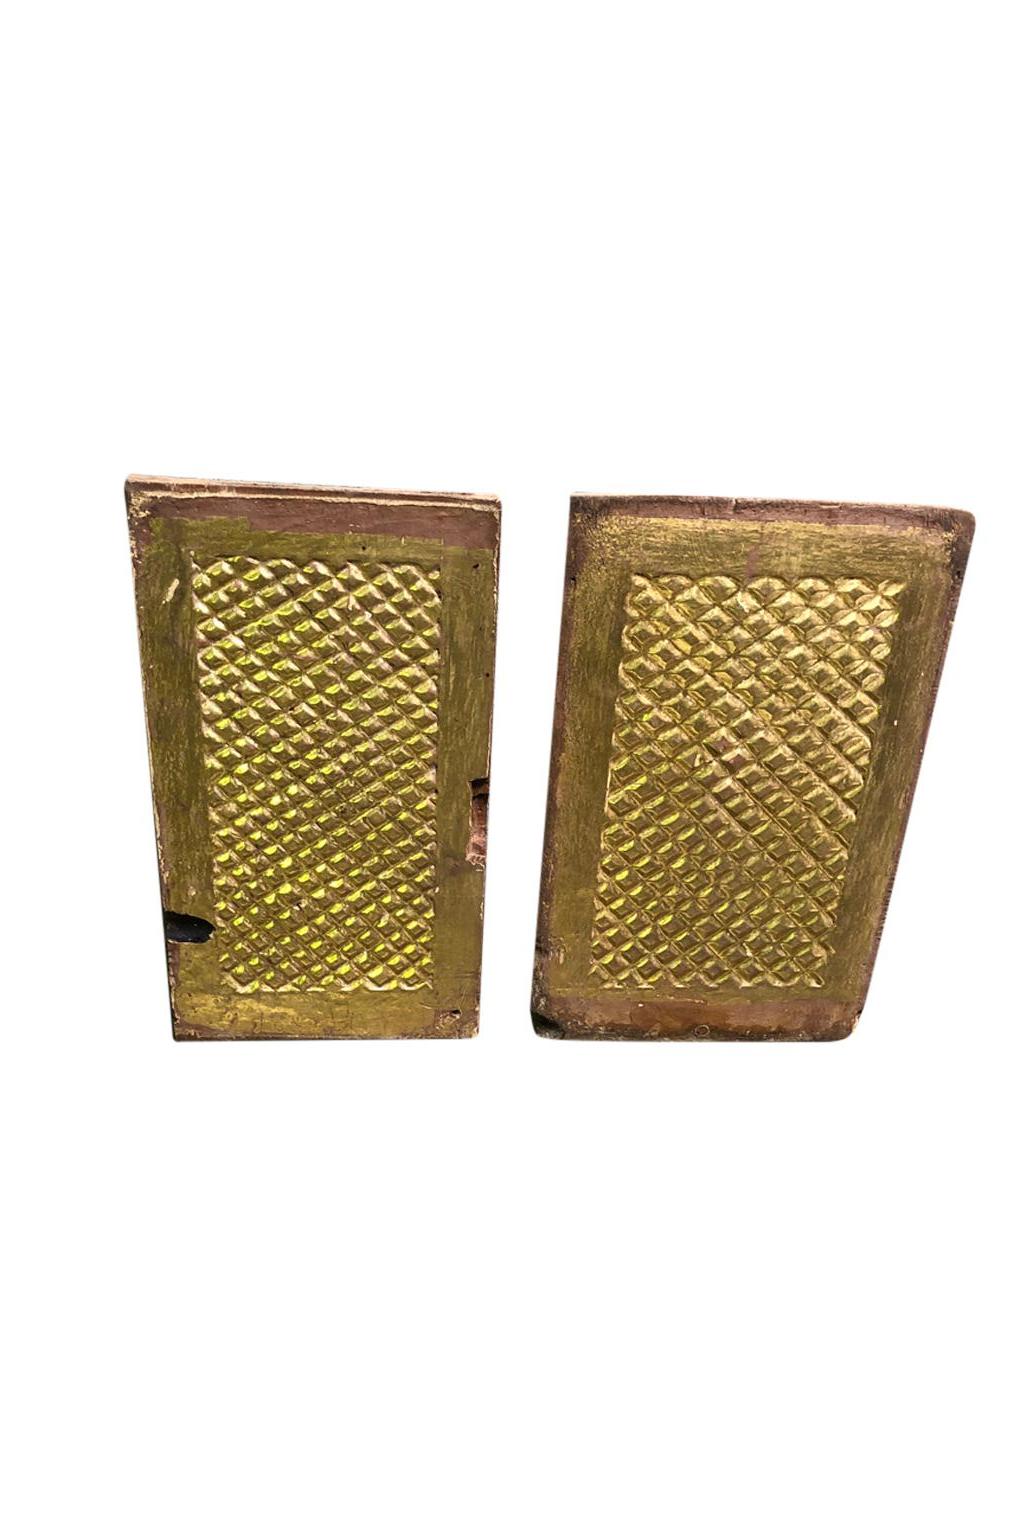 A beautiful pair of 18th century Altar Panels in giltwood carved with the diamond pattern. The gilding has a very high gold content. Stunning architectural pieces that will be fabulous converted into lamps.